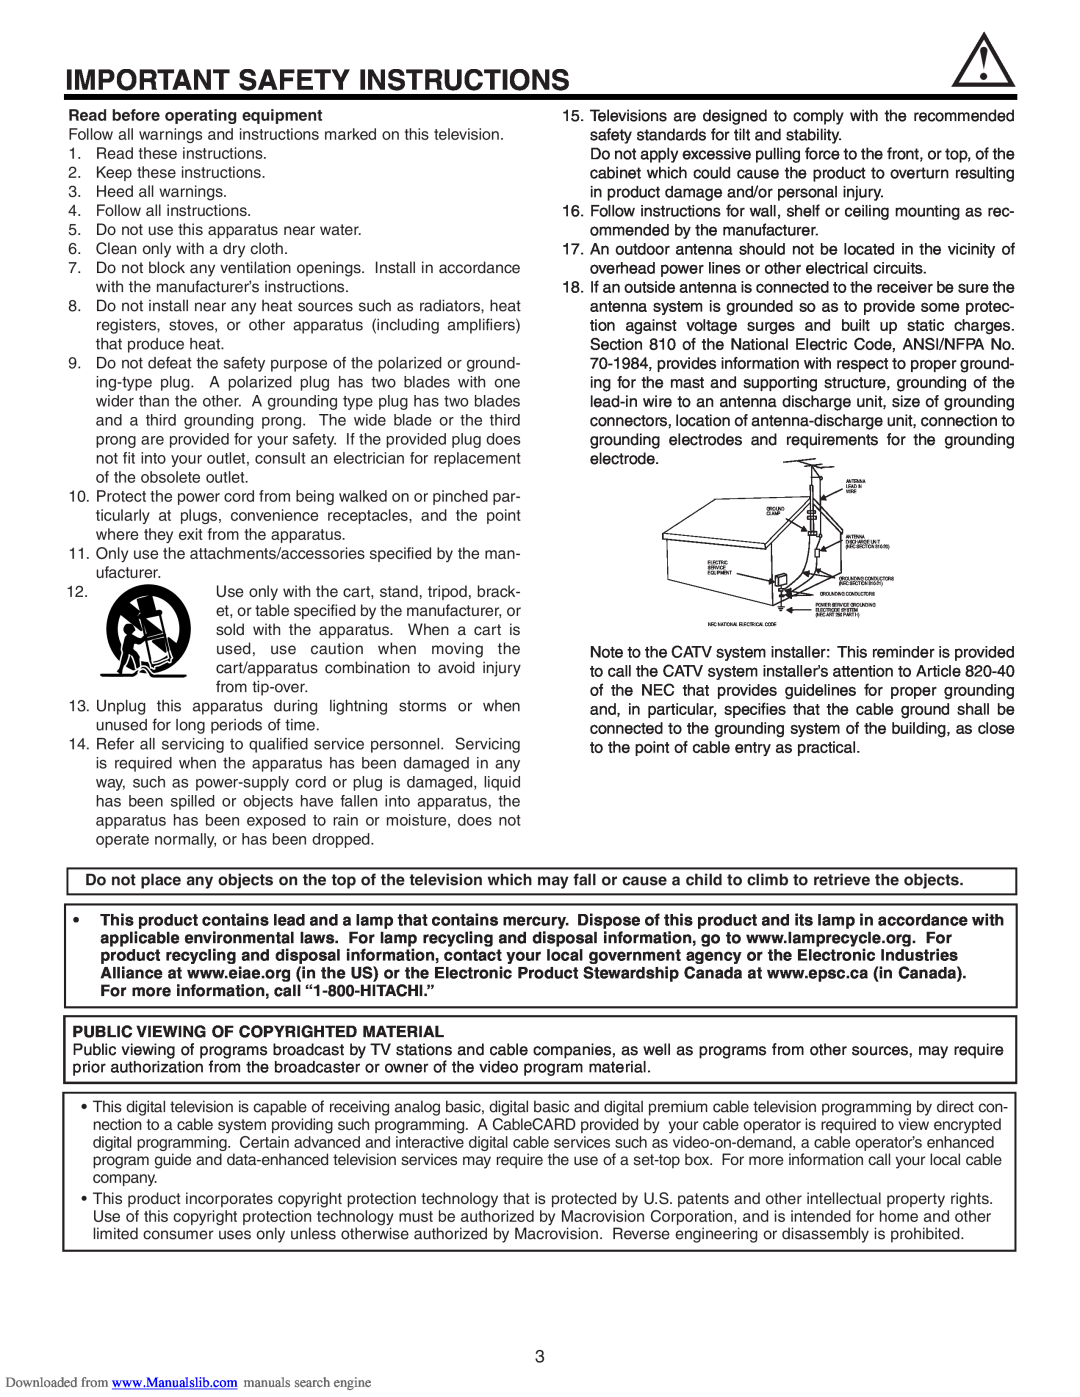 Hitachi 60VS810A Important Safety Instructions, Read before operating equipment, Public Viewing Of Copyrighted Material 